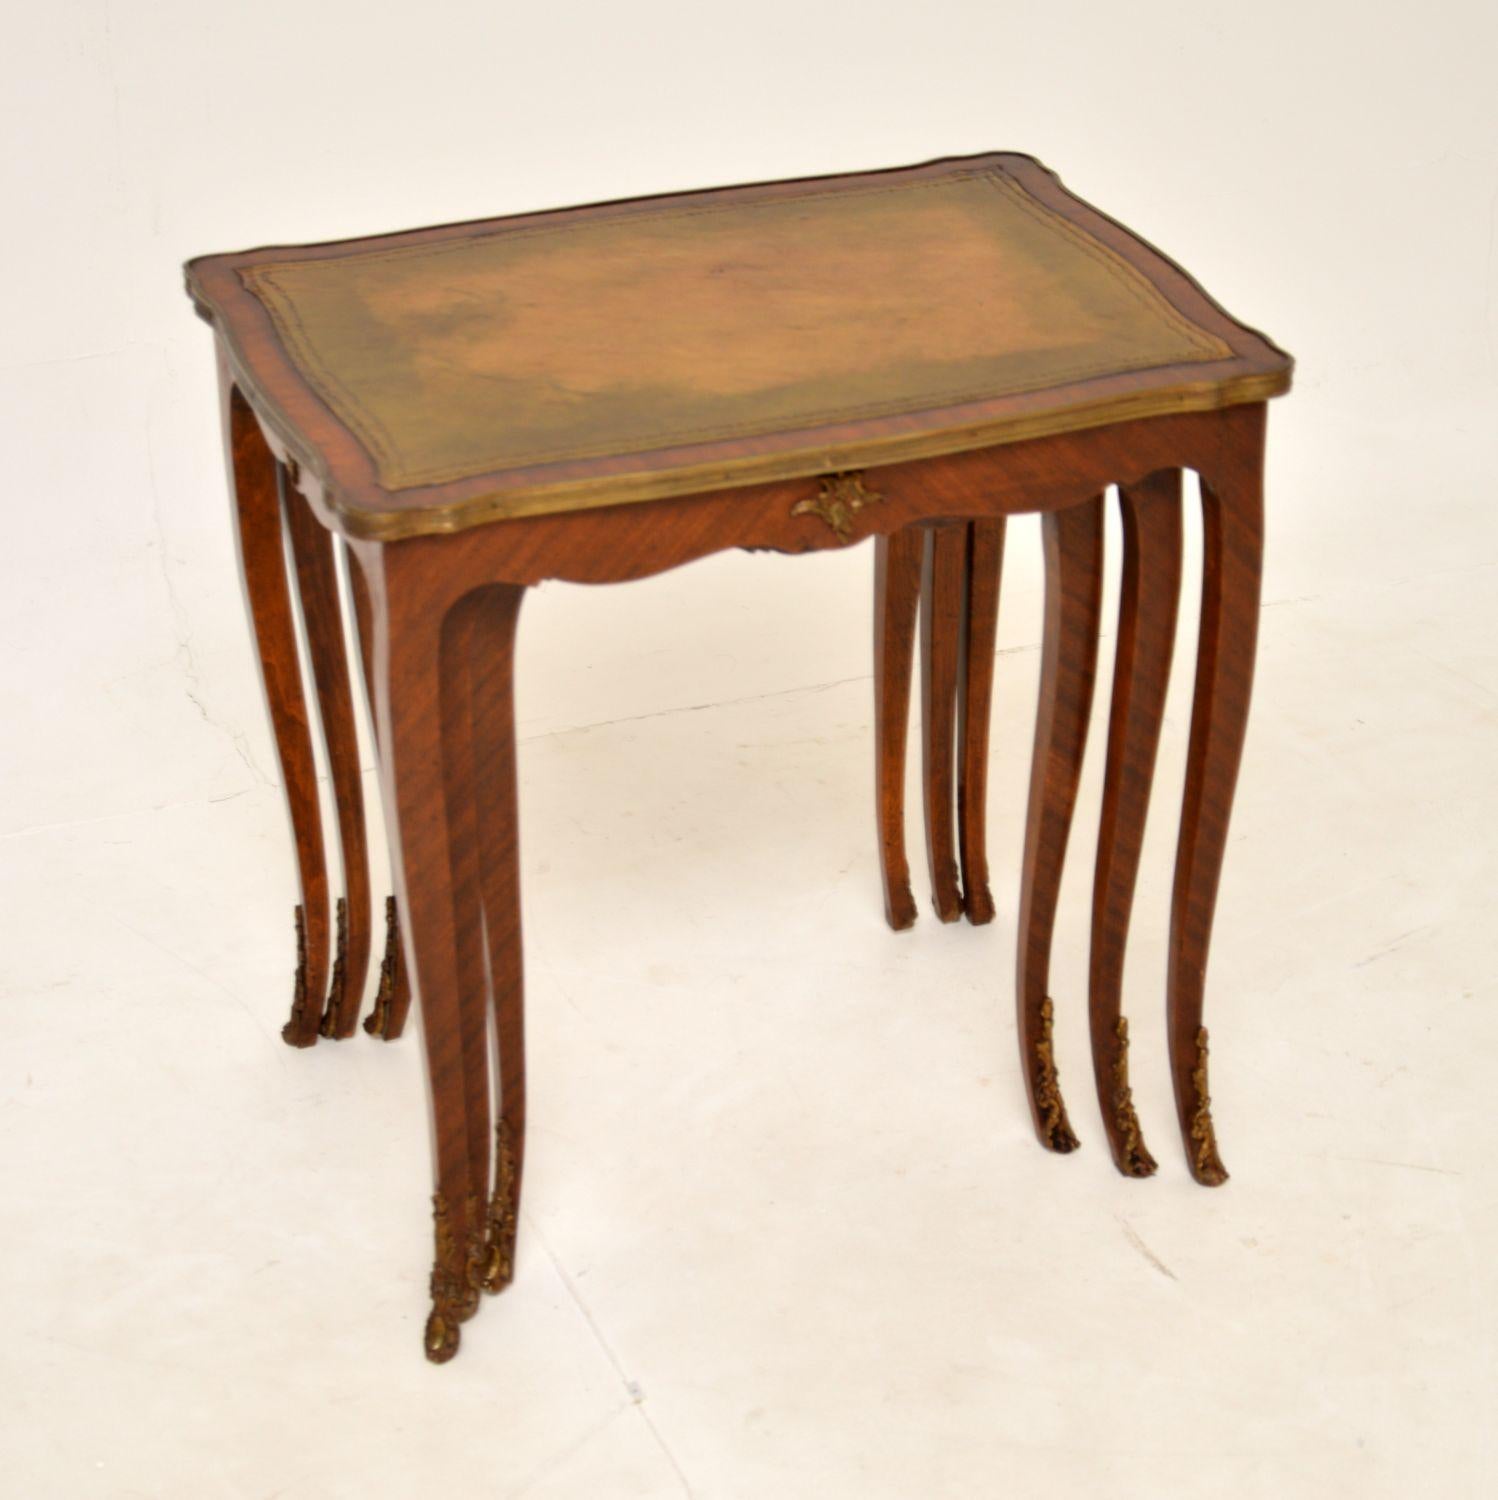 A gorgeous antique French nest of tables, with inset leather tops. They were made in France, and date from around the 1920-1930’s.

The quality is superb, they are a lovely size and have a very useful design. The inset leather tops are hand coloured